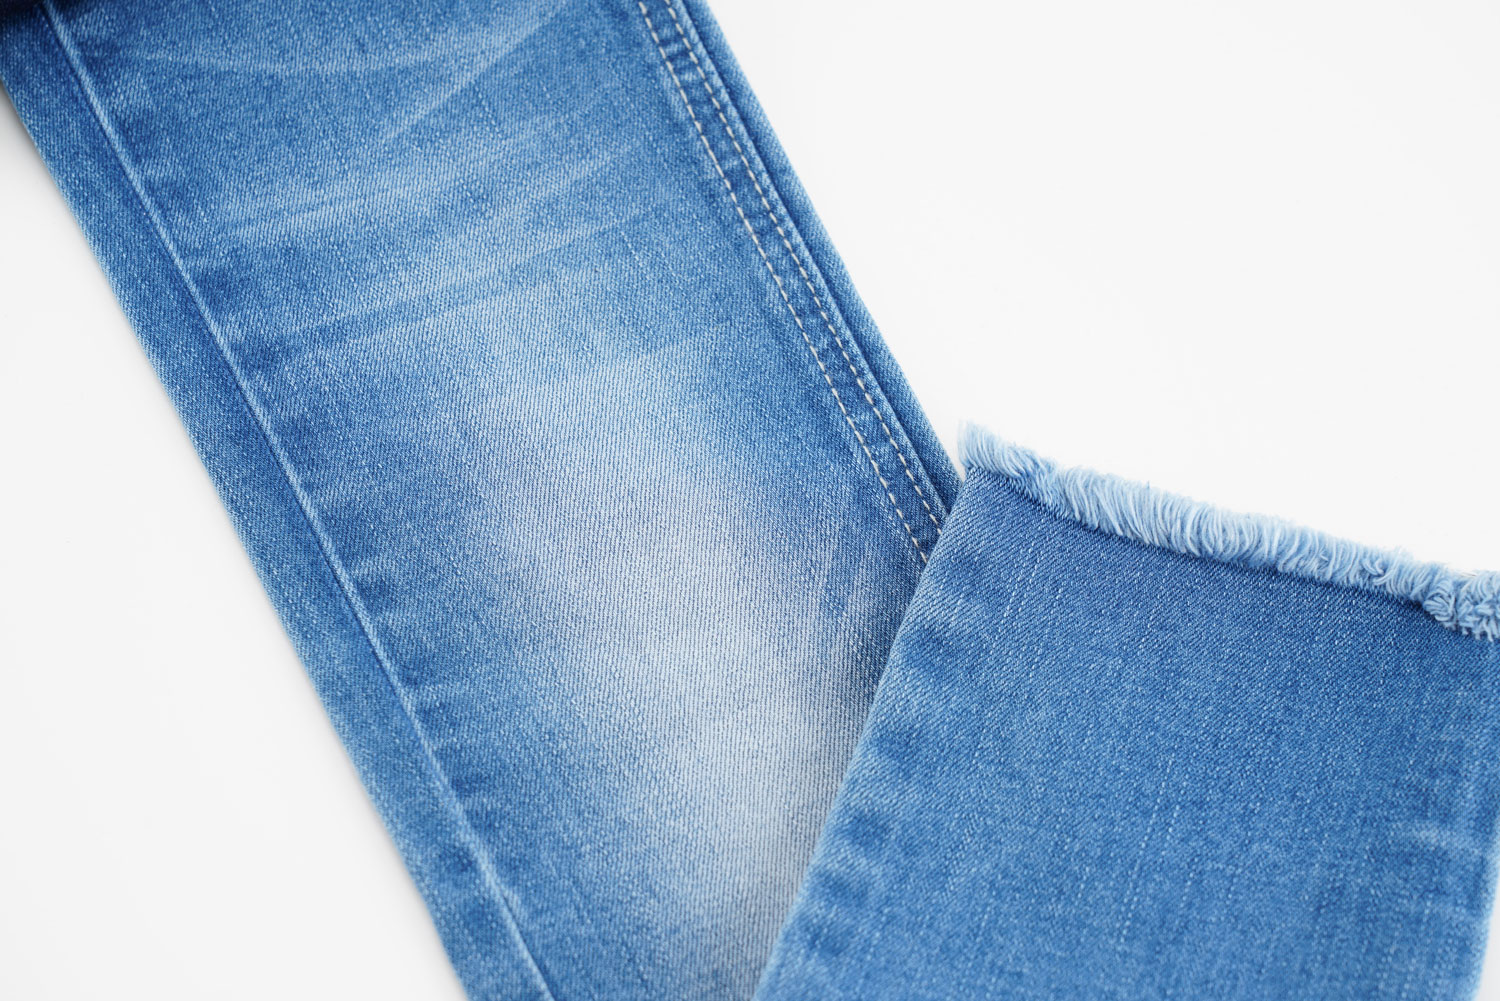 How to Buy Cheap and Stylish Quality Denim 1